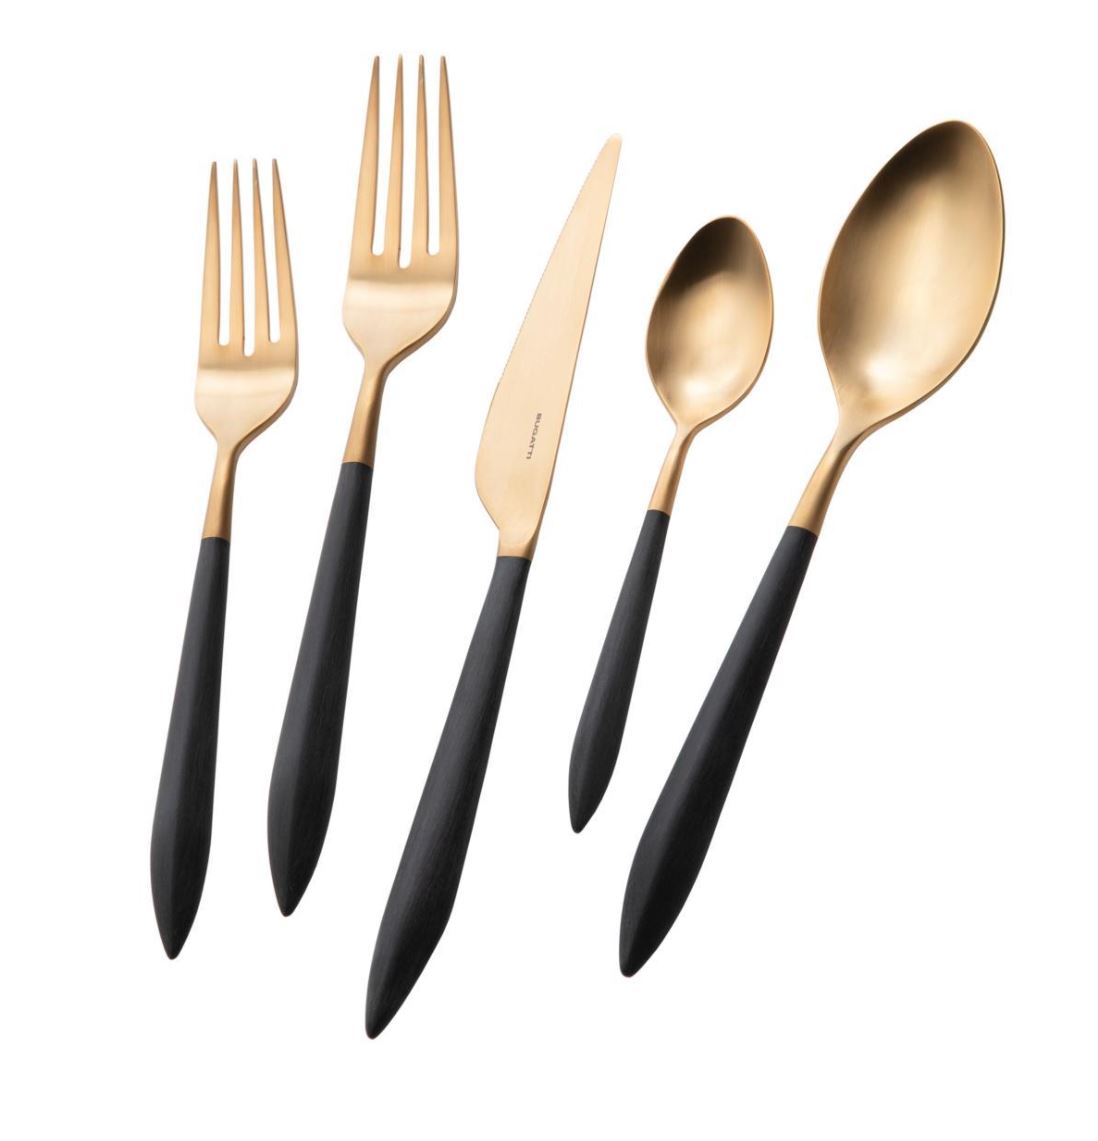 Ares brushed GOLD PVD black 5 piece place setting